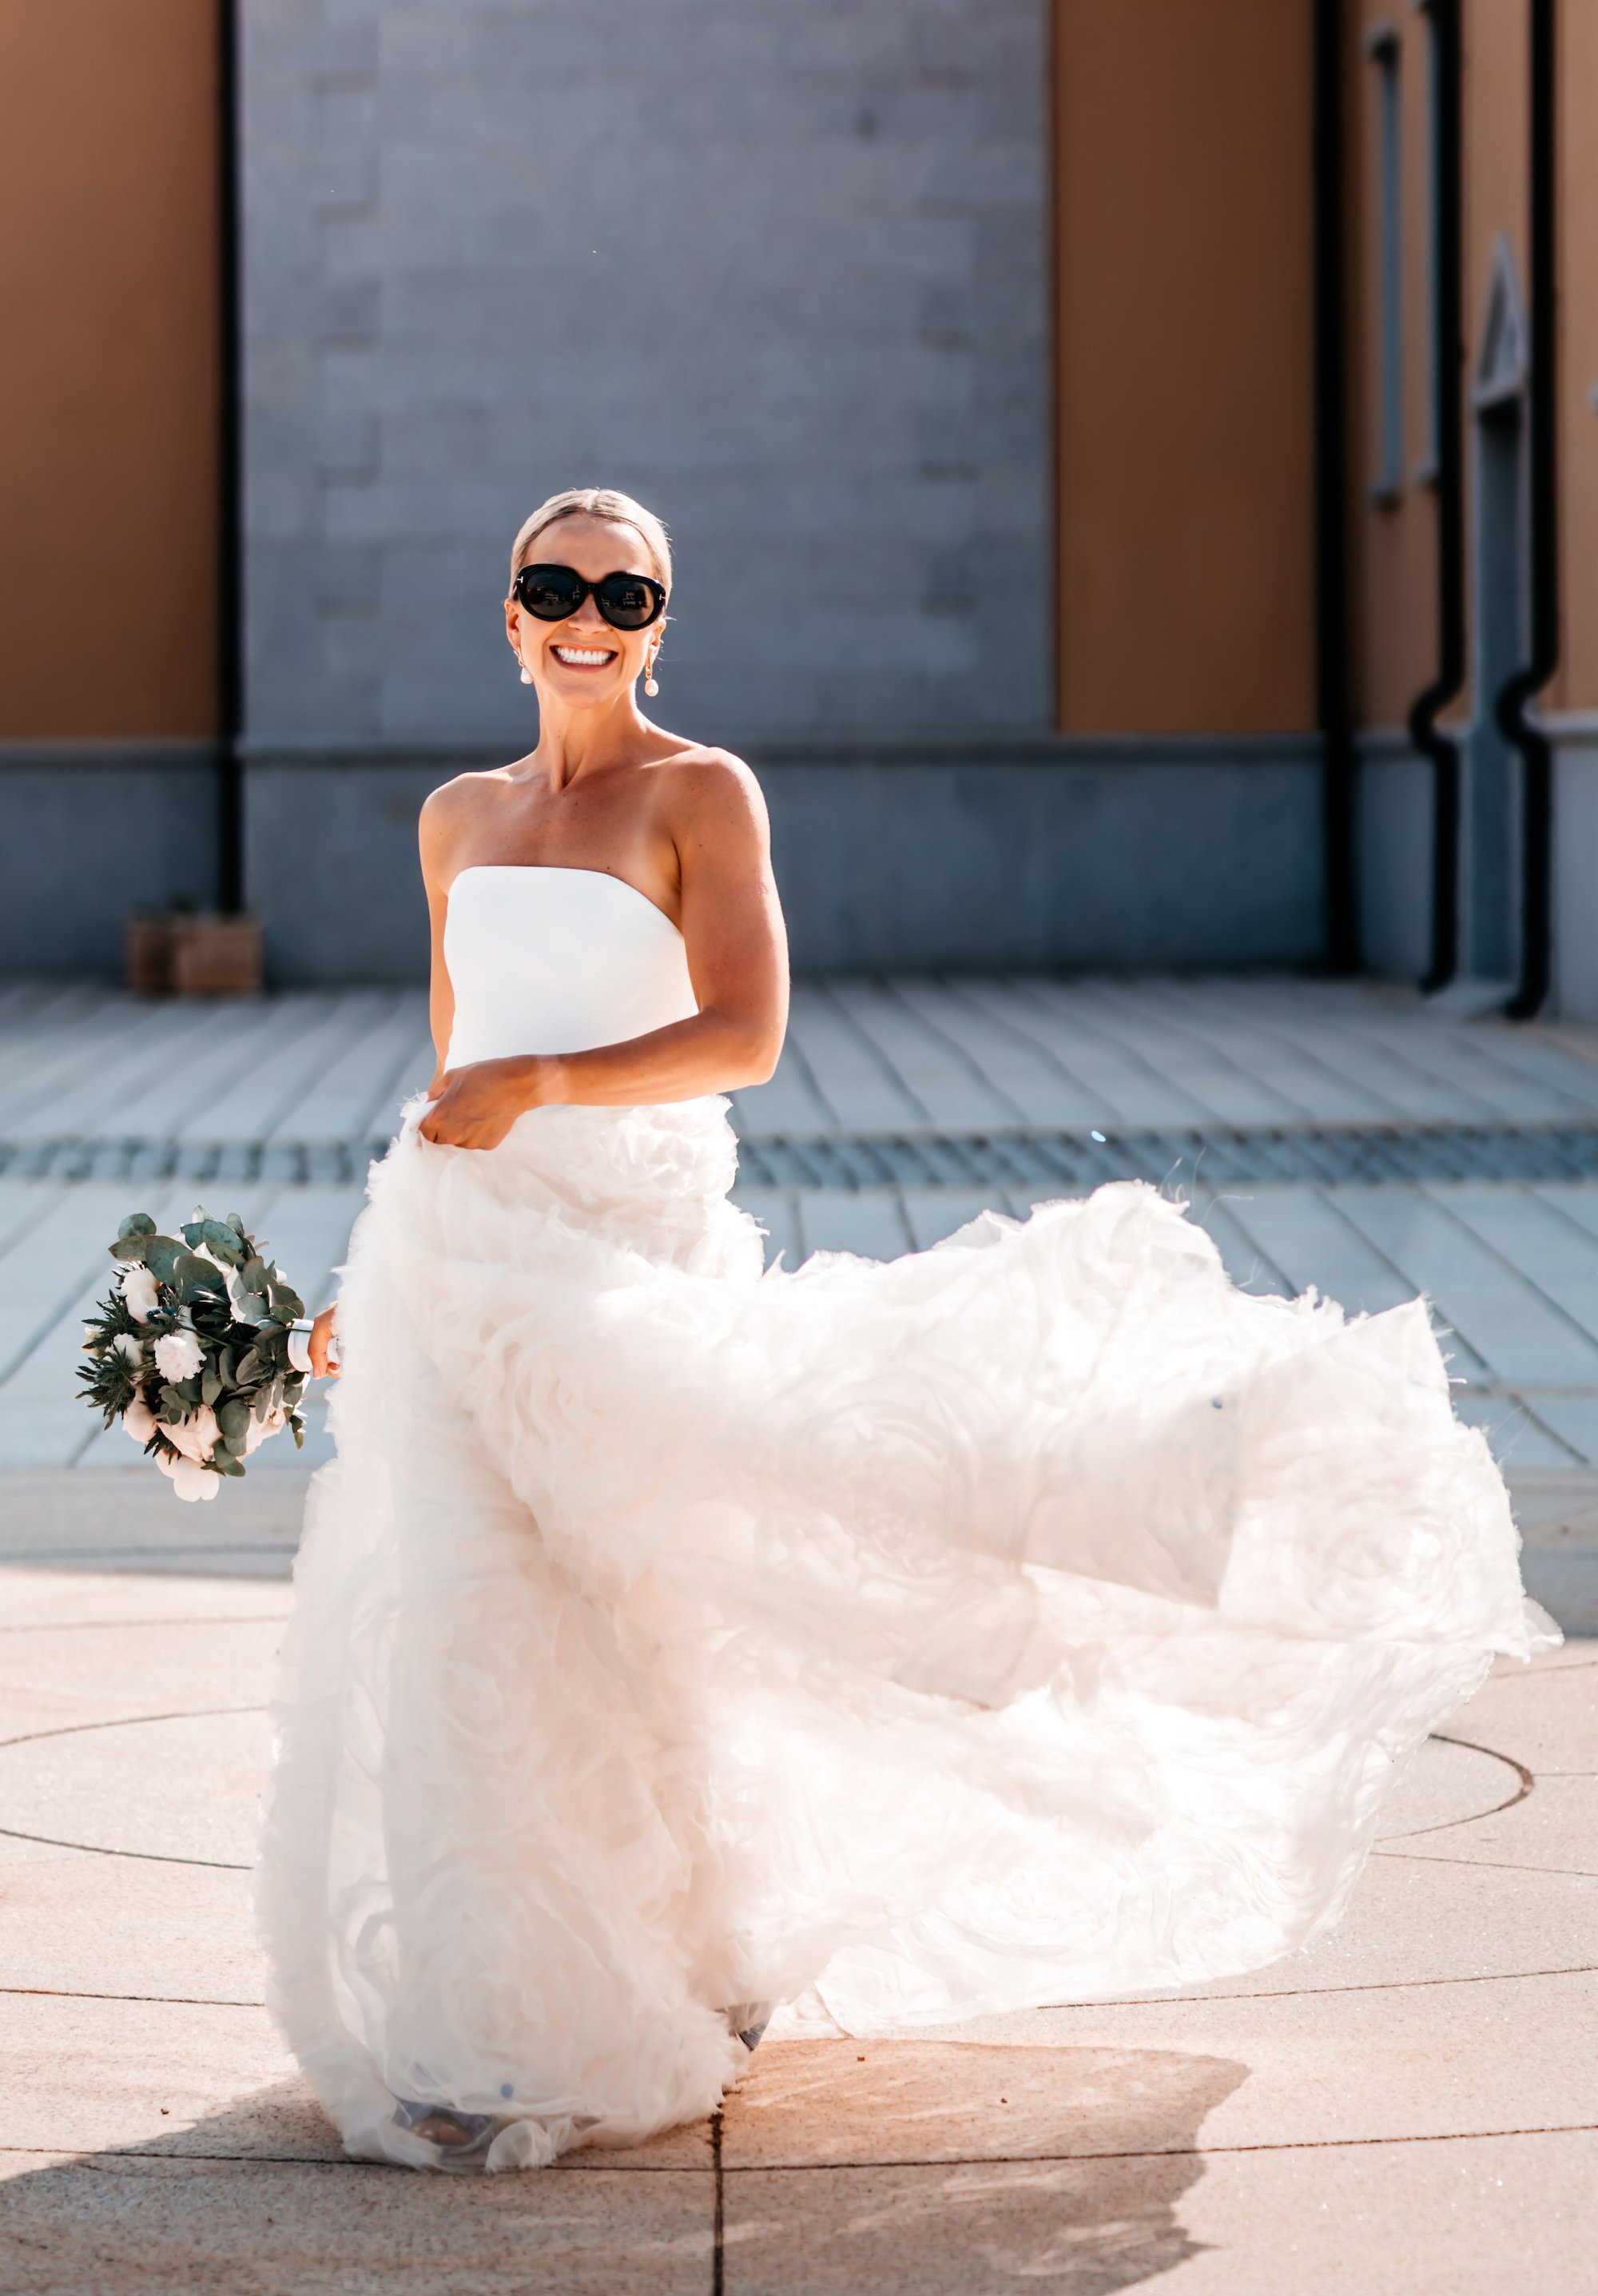 Beautiful bride Florence wore the Oliver wedding dress and Ruffle Rose skirt by Halfpenny London